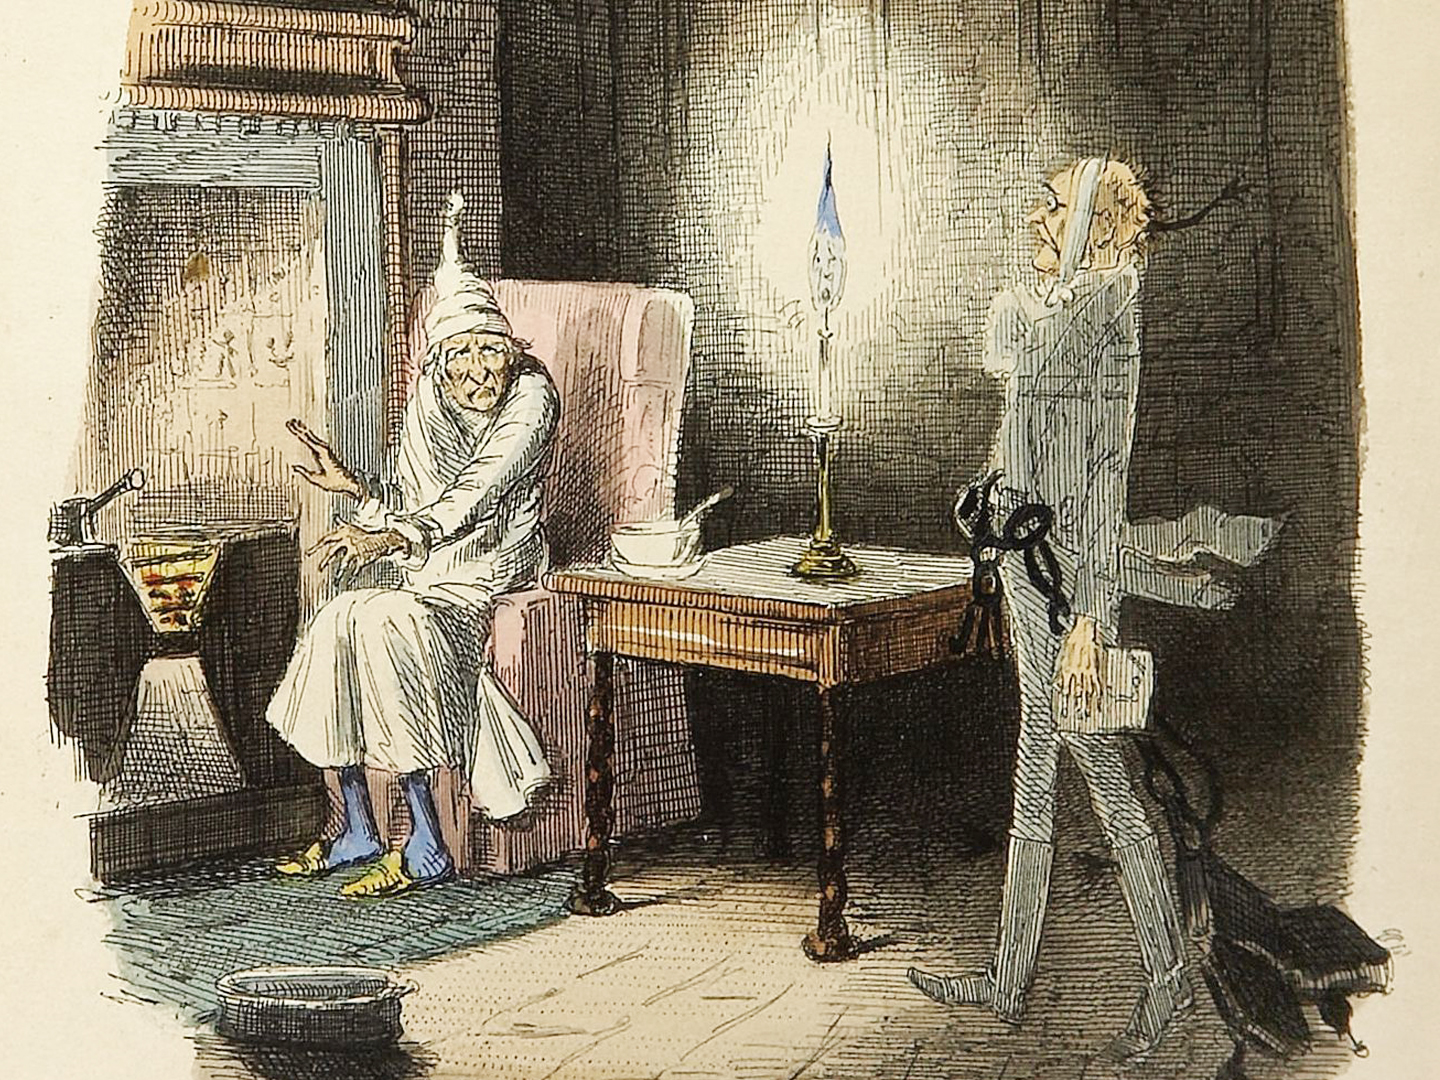 Illustration of Scrooge in his signature nightshirt and cap sitting in a red armchair near a fireplace. Scrooge wears a frightened expression as the ghost of his former business partner, Jacob Marley, visits him in the middle of the night, wrapped in heavy chains.